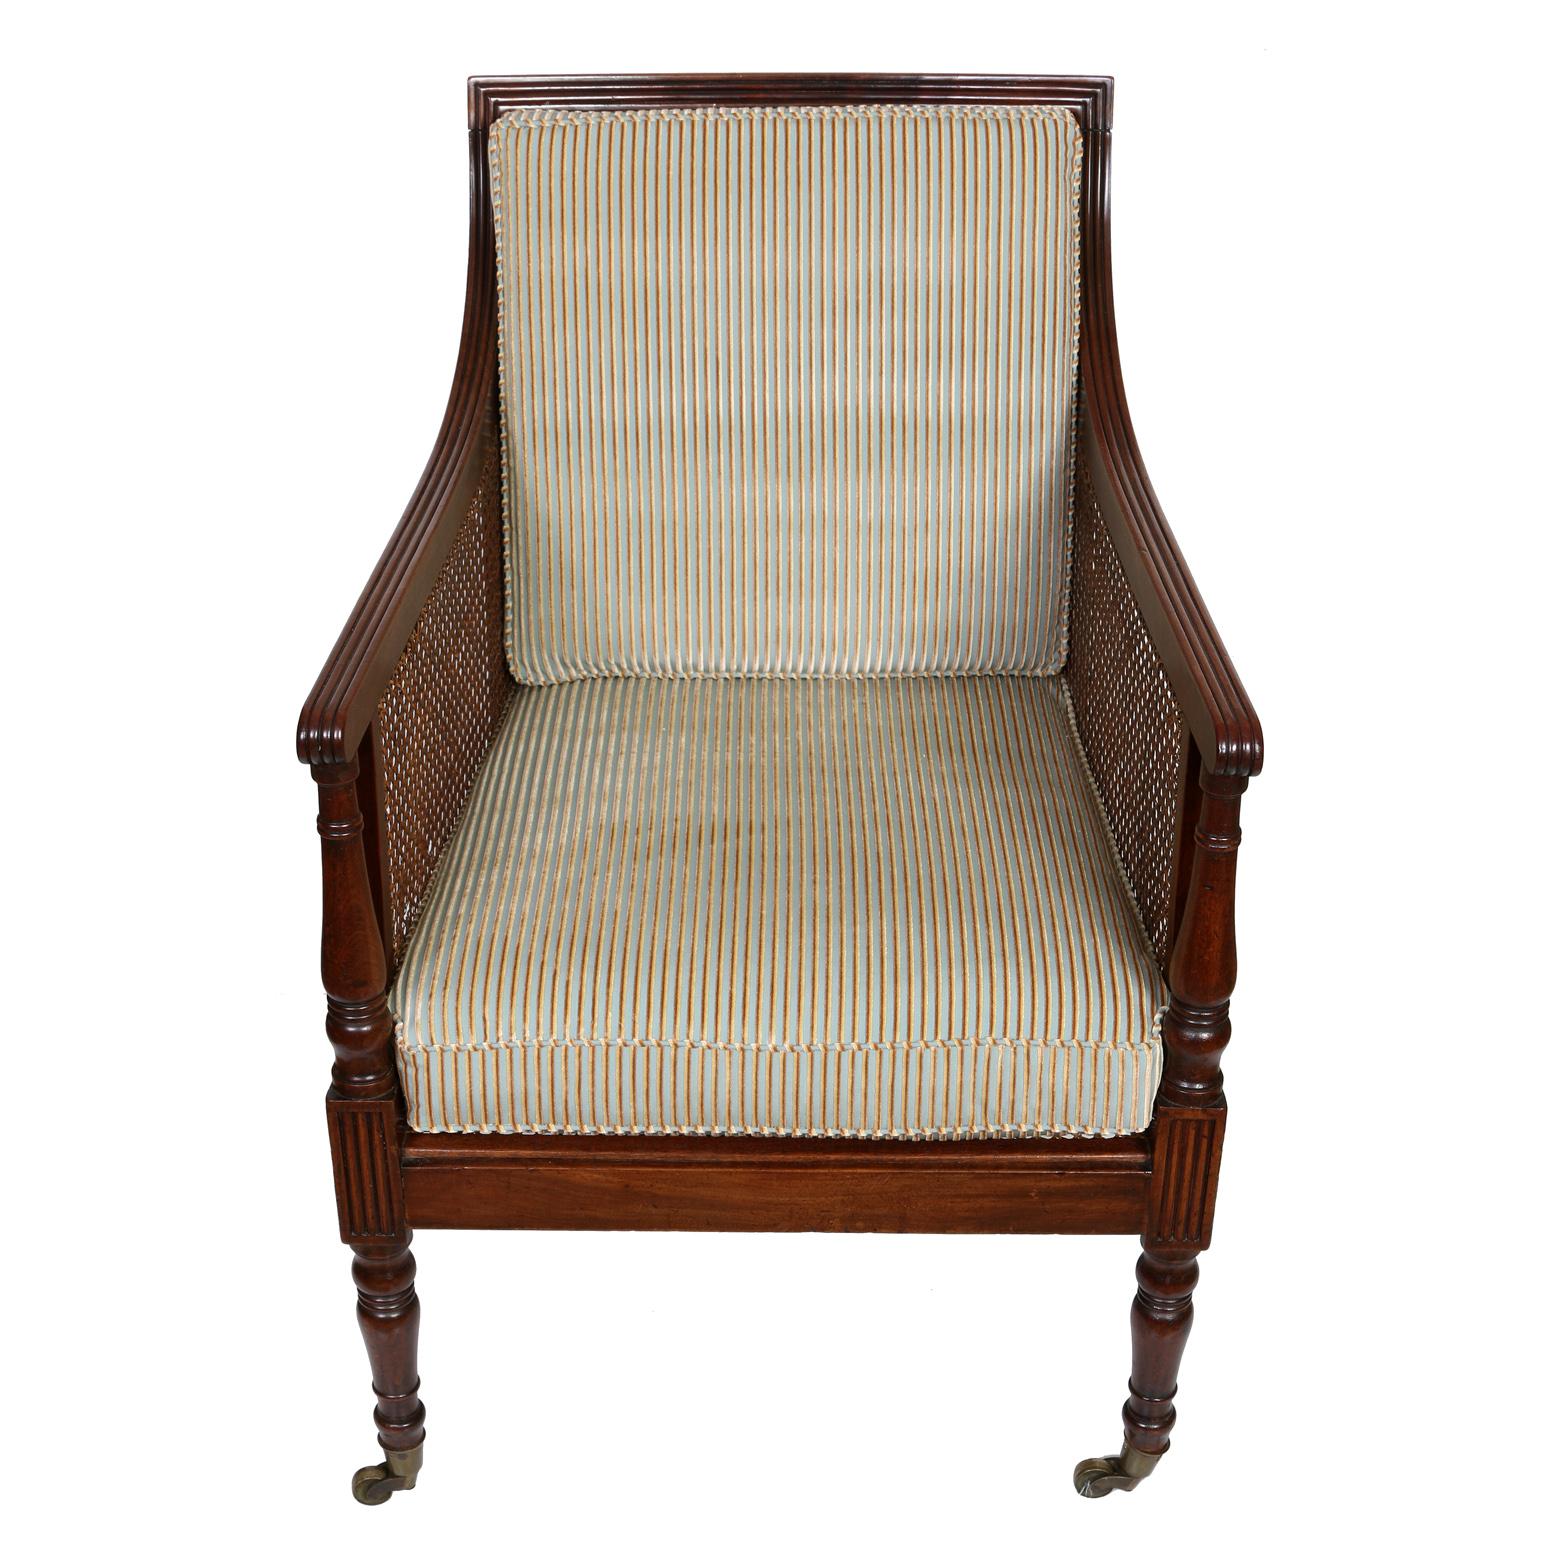 An almost pair of Regency style library chairs with distinctive caning to back, seat and sides with fluted frame and caster wheels.  Both handsome wood chairs have newly upholstered striped velvet fabric to back and seat cushions, with one chair